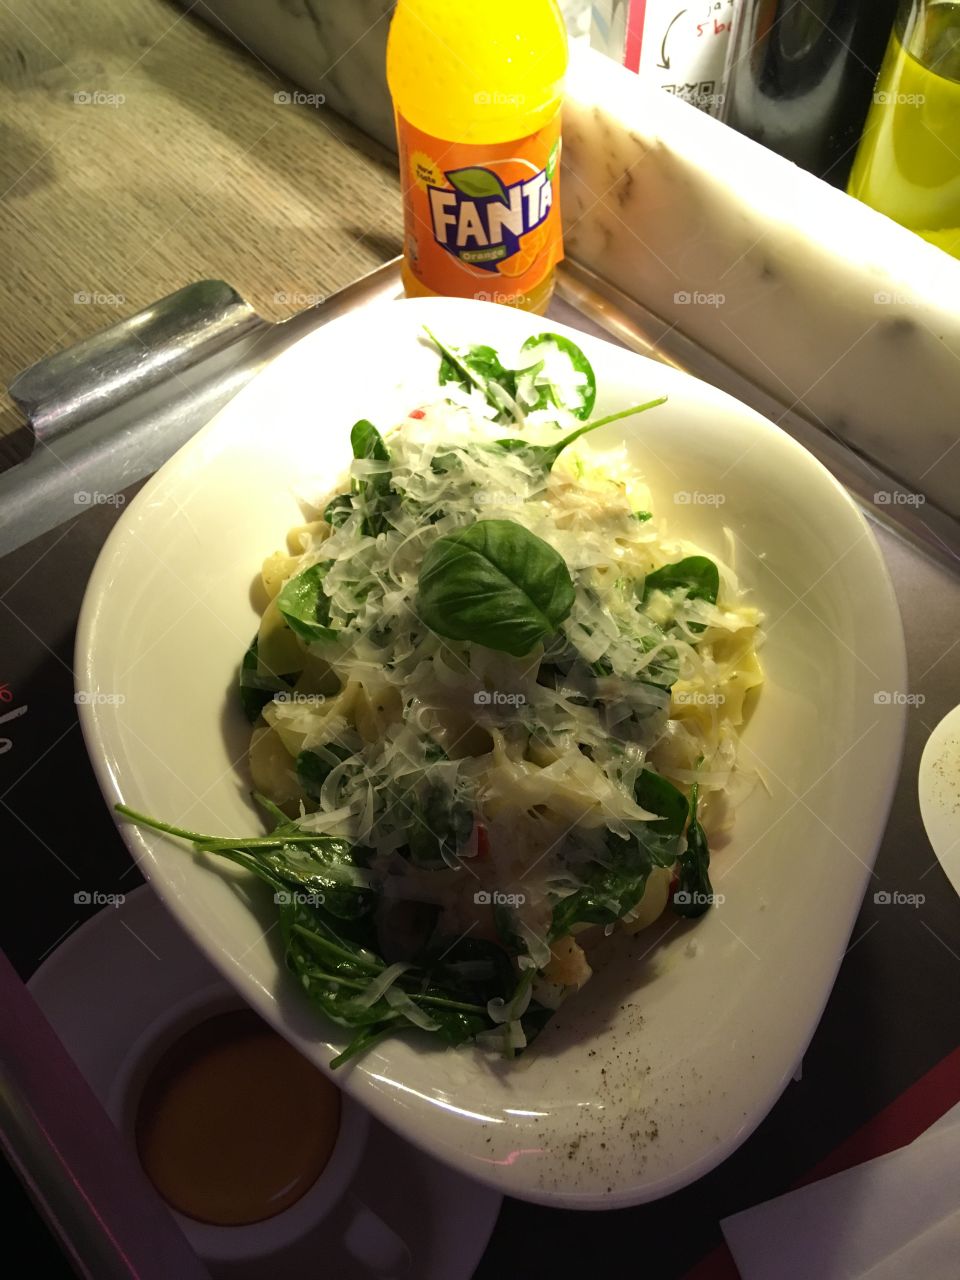 Its pasta time, visited Vapiano and this tasted deliciously! I totally recommend it